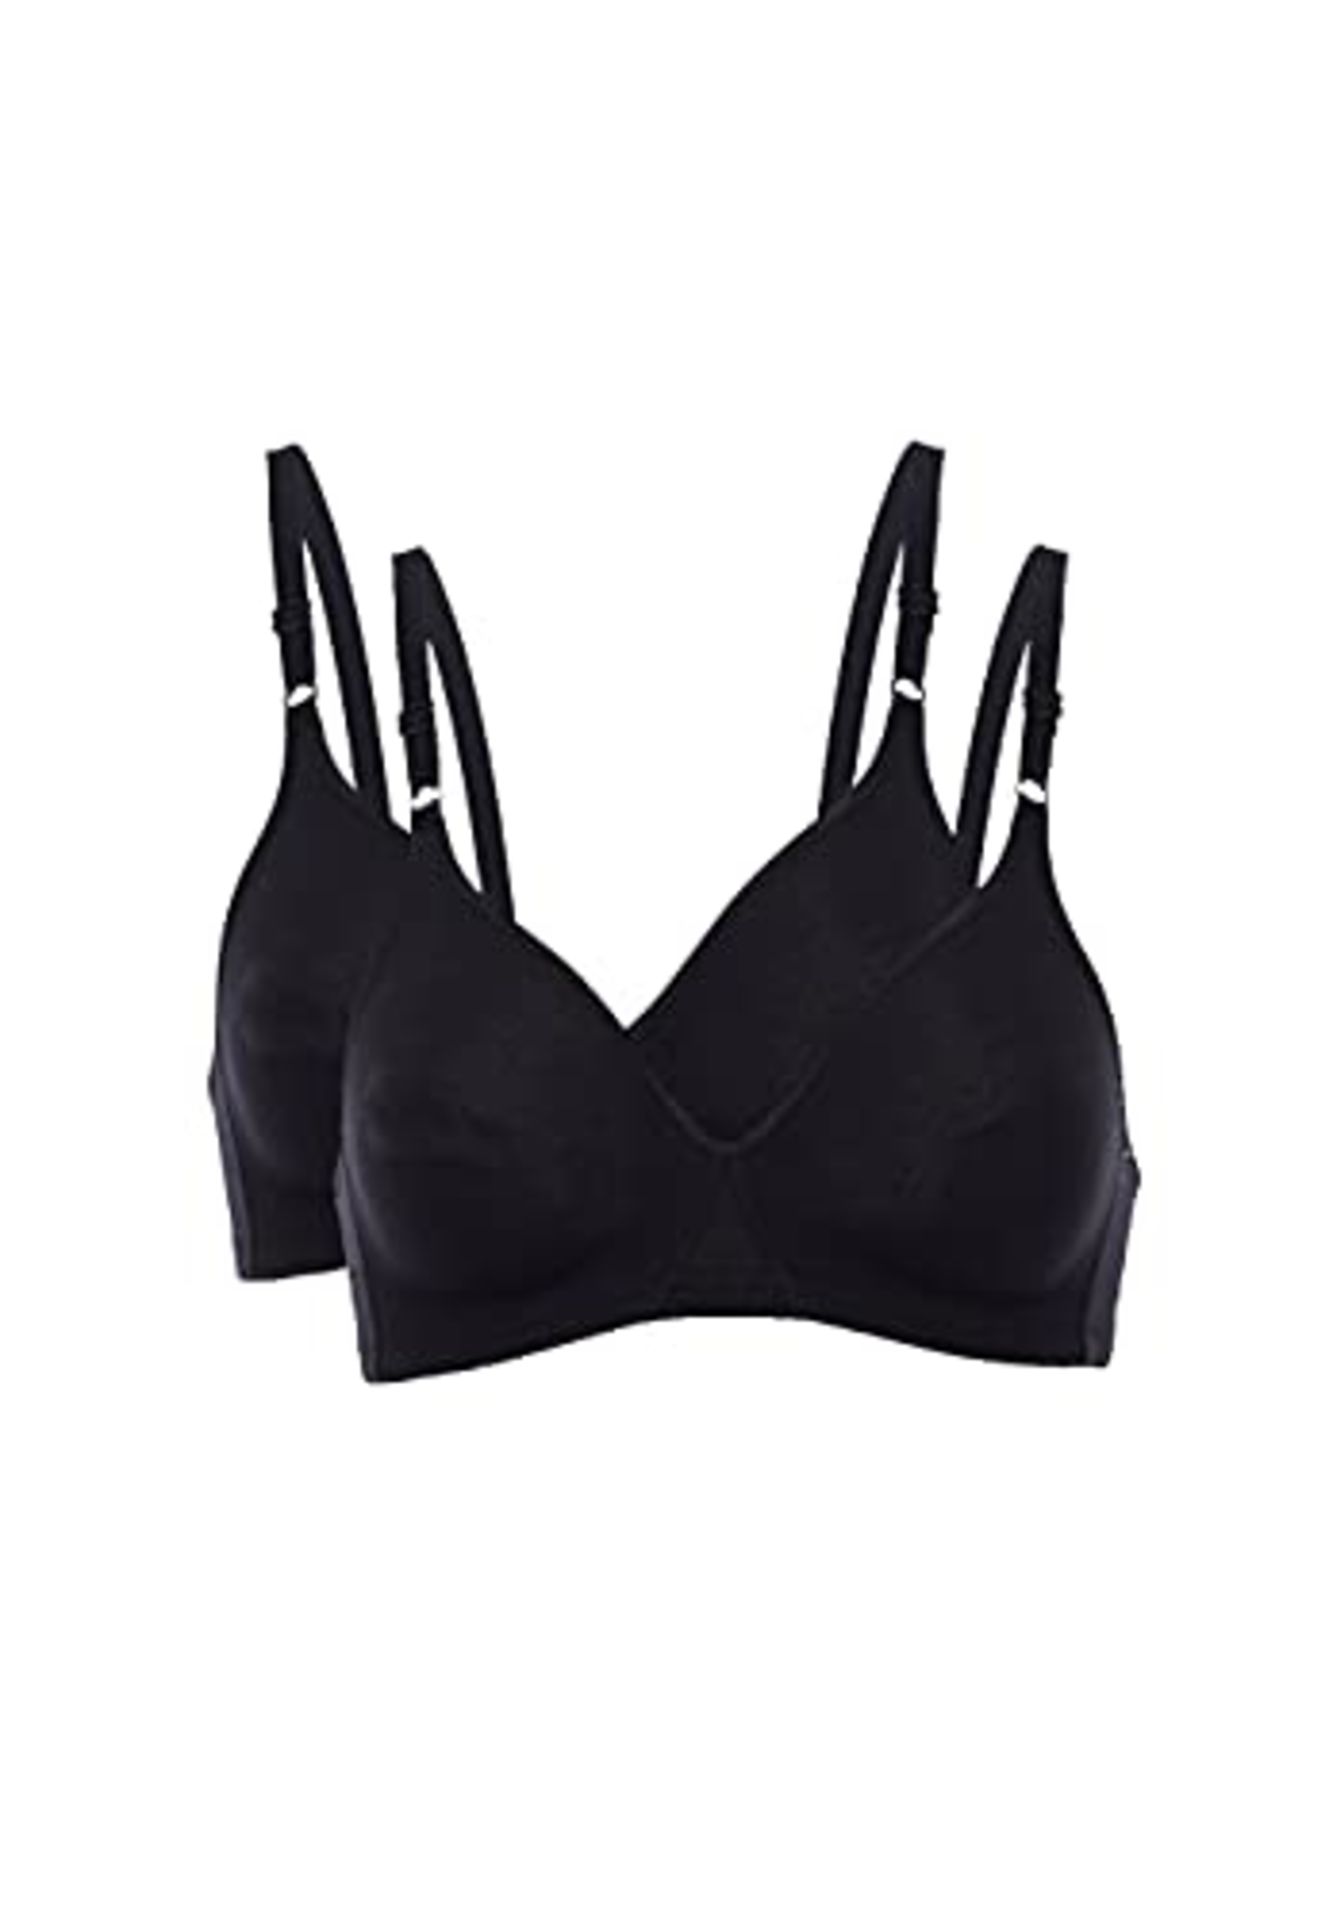 Lovely Wire-Free Cotton Line Bra for Women x2